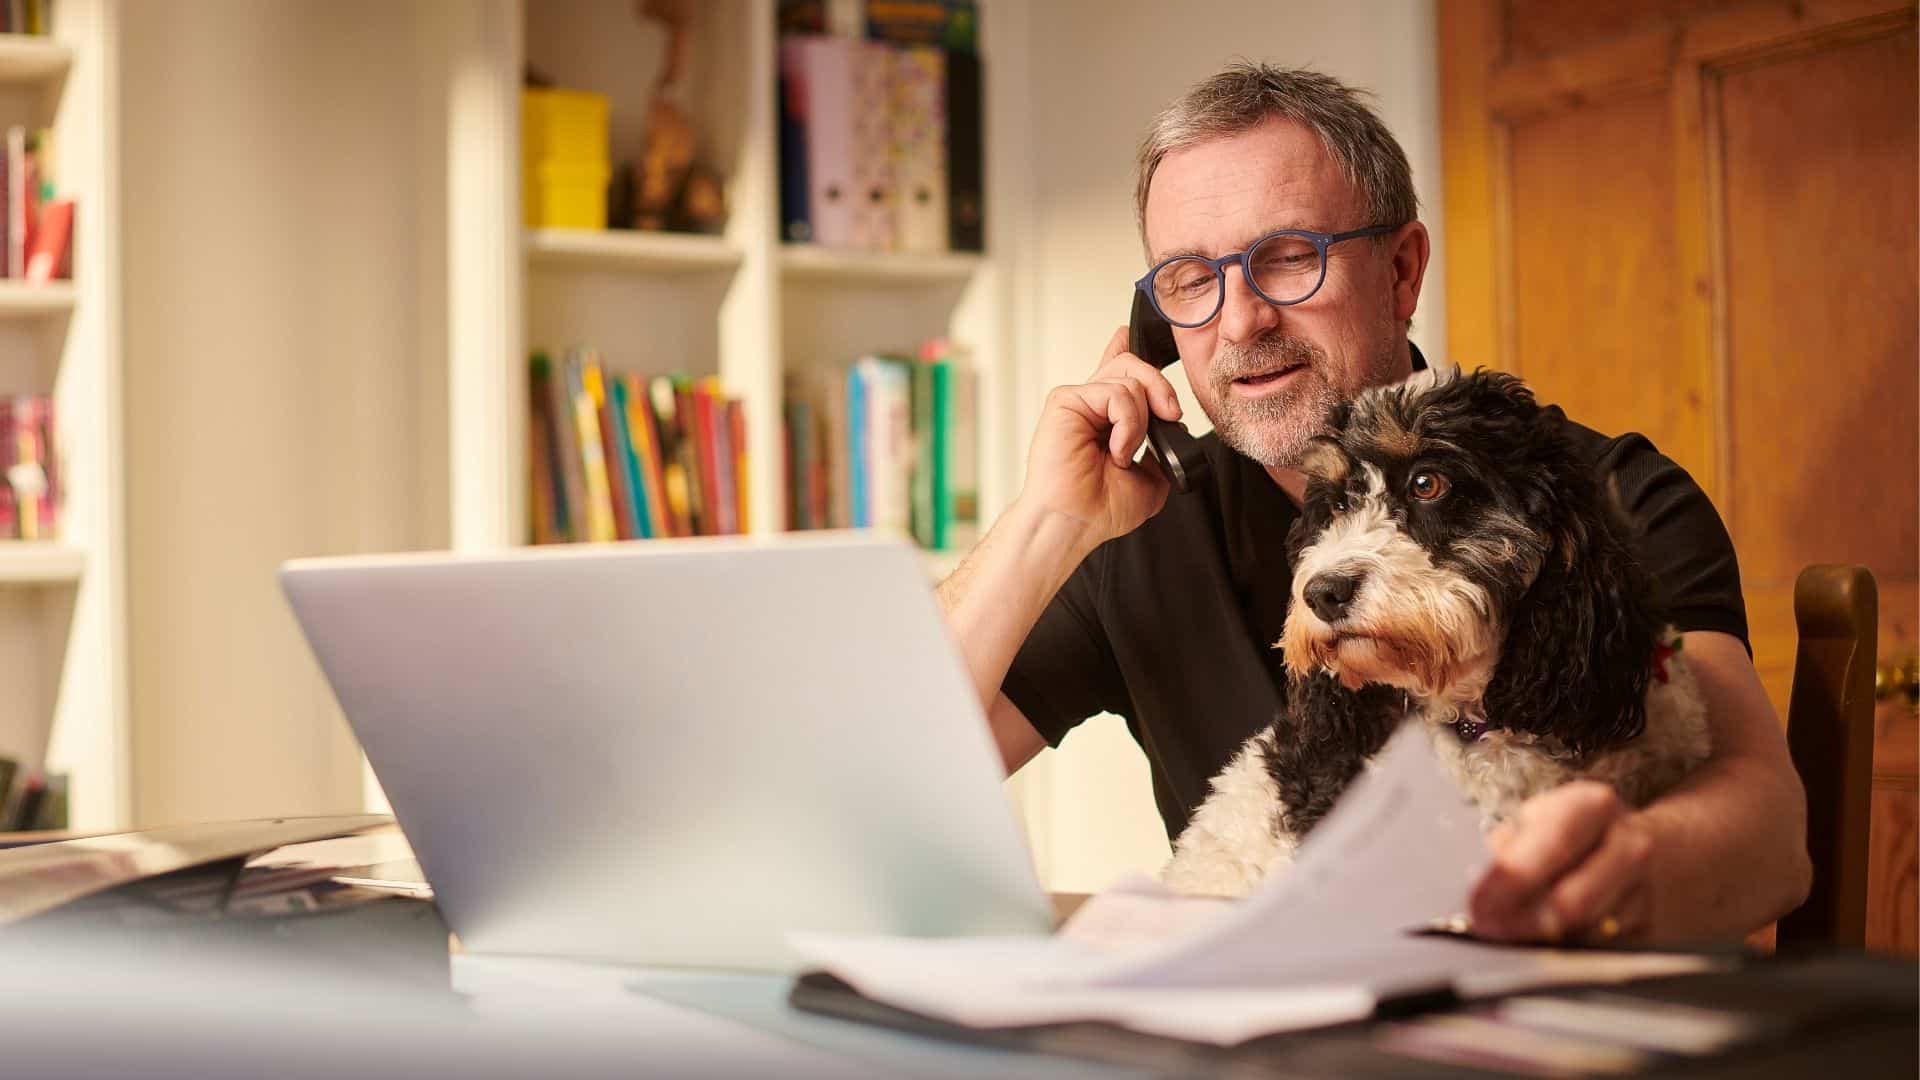 A man sat at his desk with his dog on his lap. He is on the phone and looking at his laptop screen, surrounded by papers.